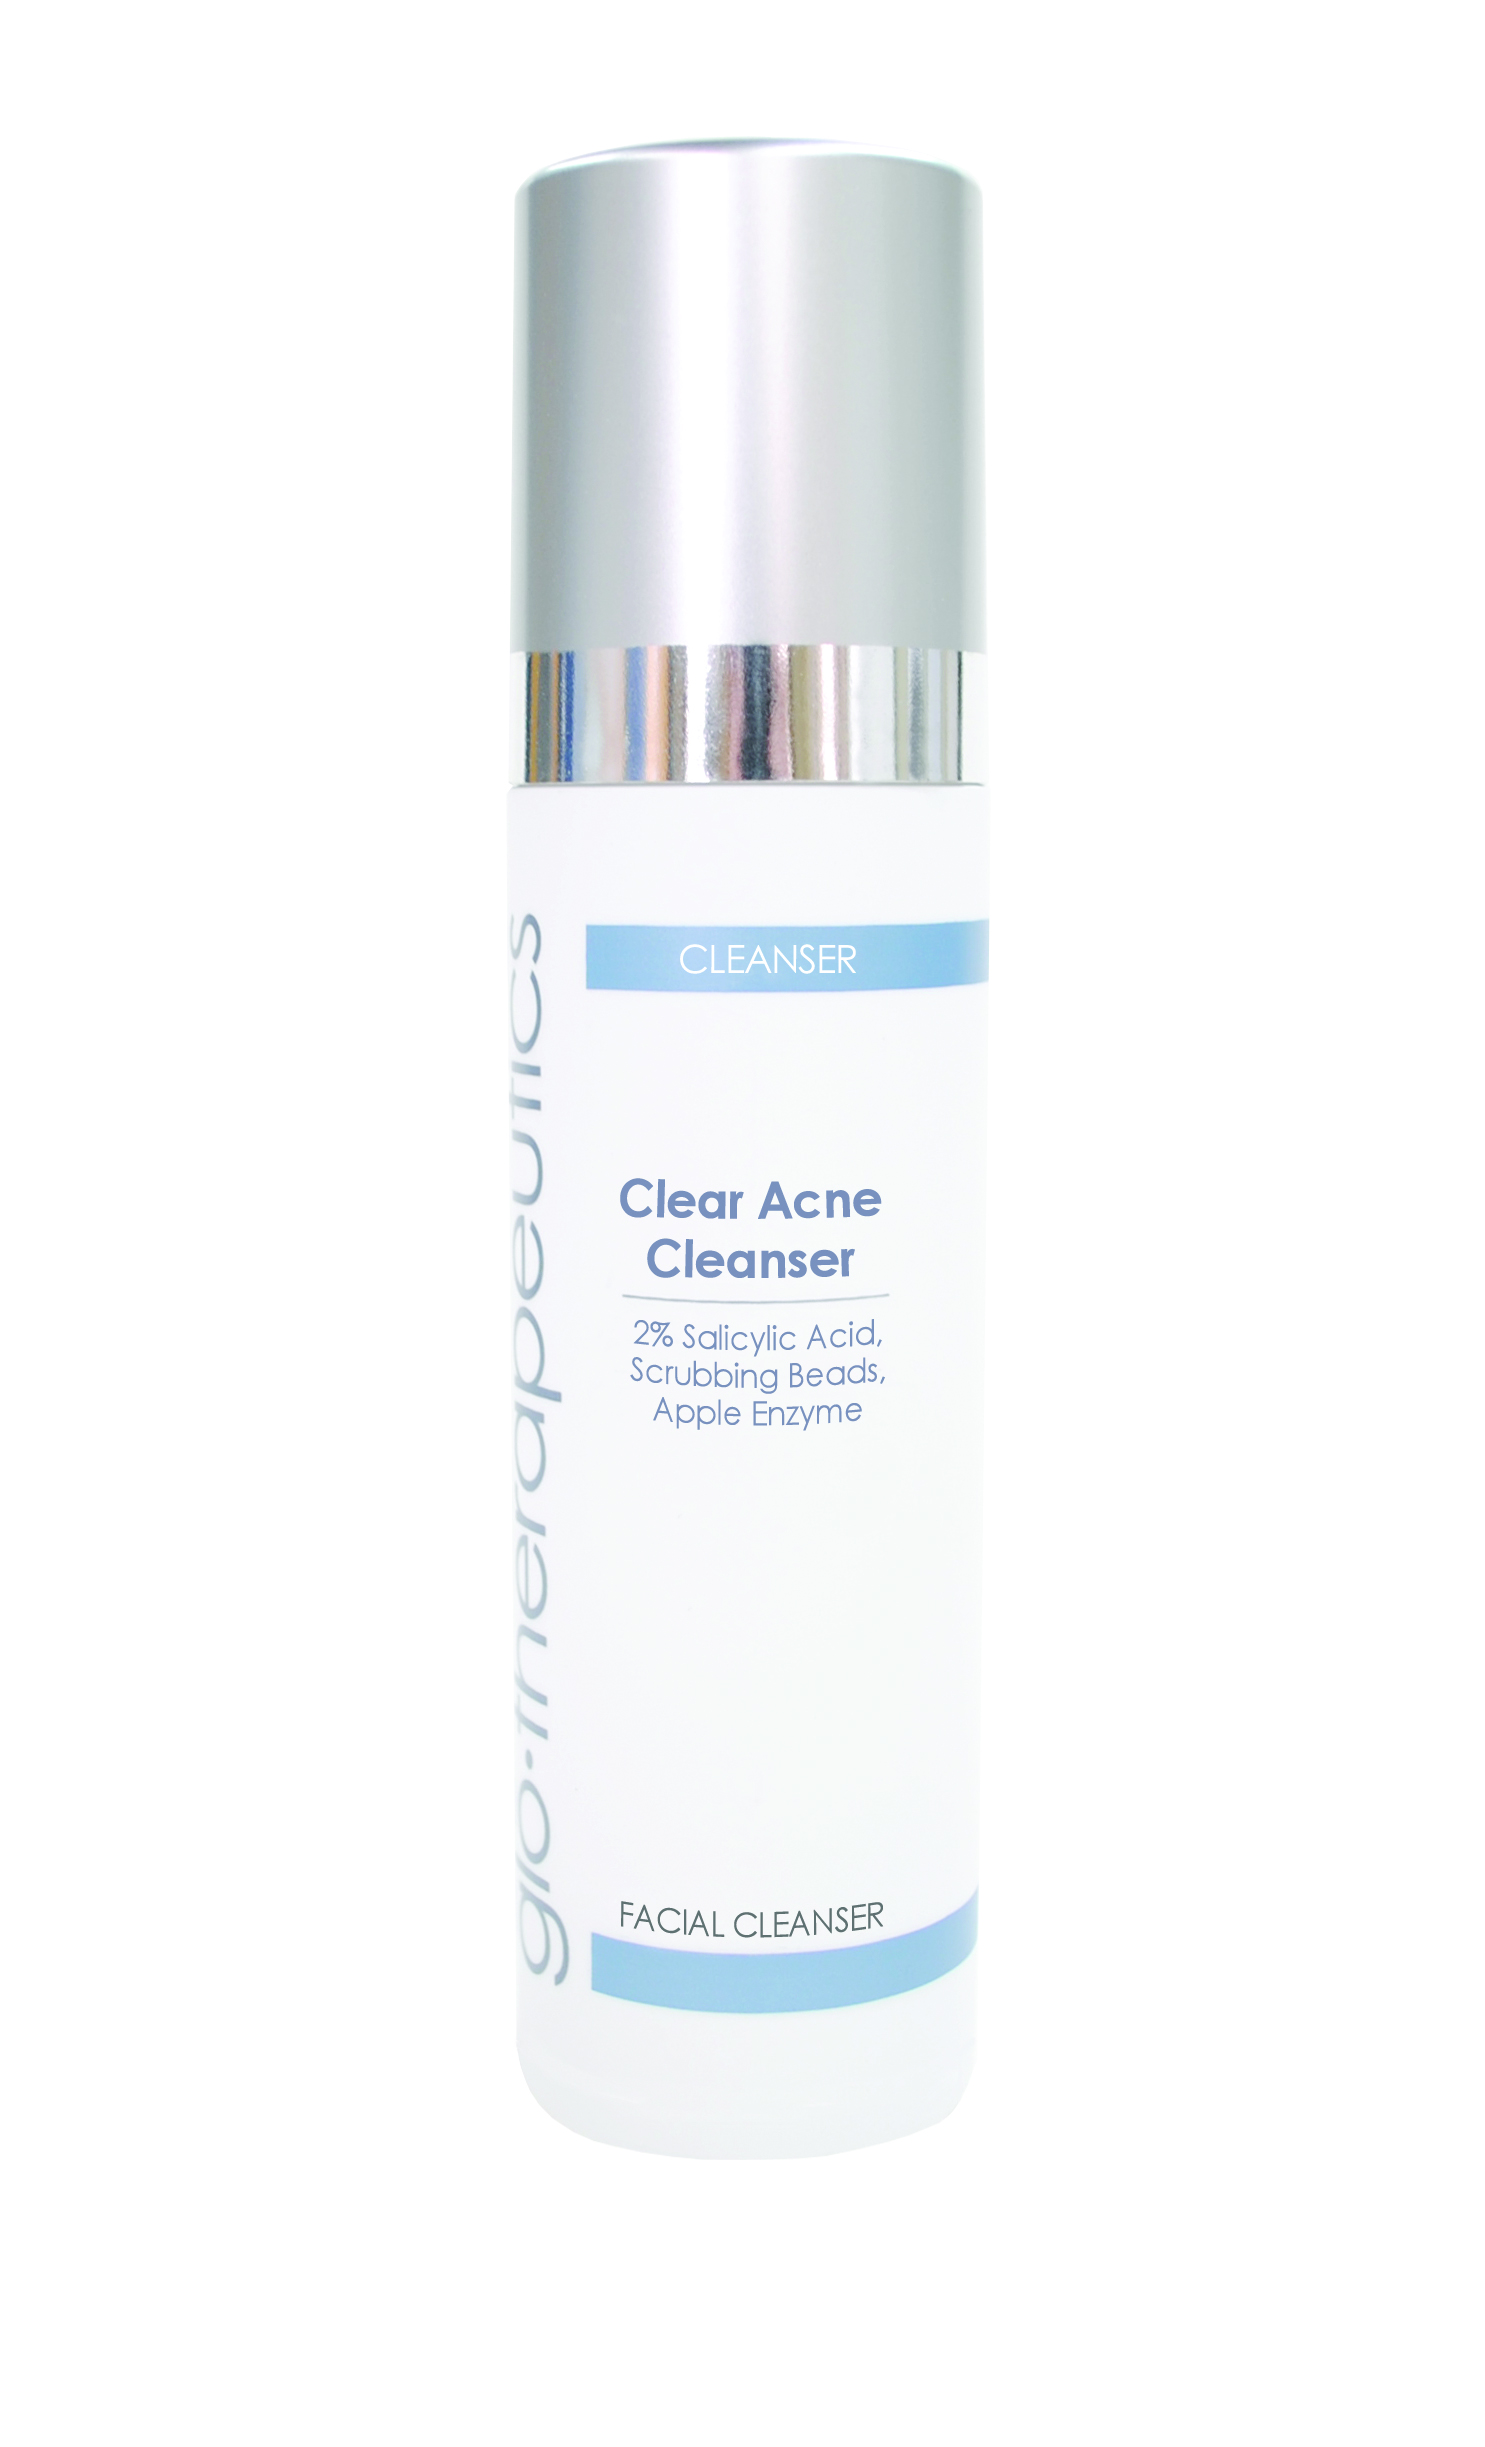 gloTherapeutics Clear Acne Cleanser